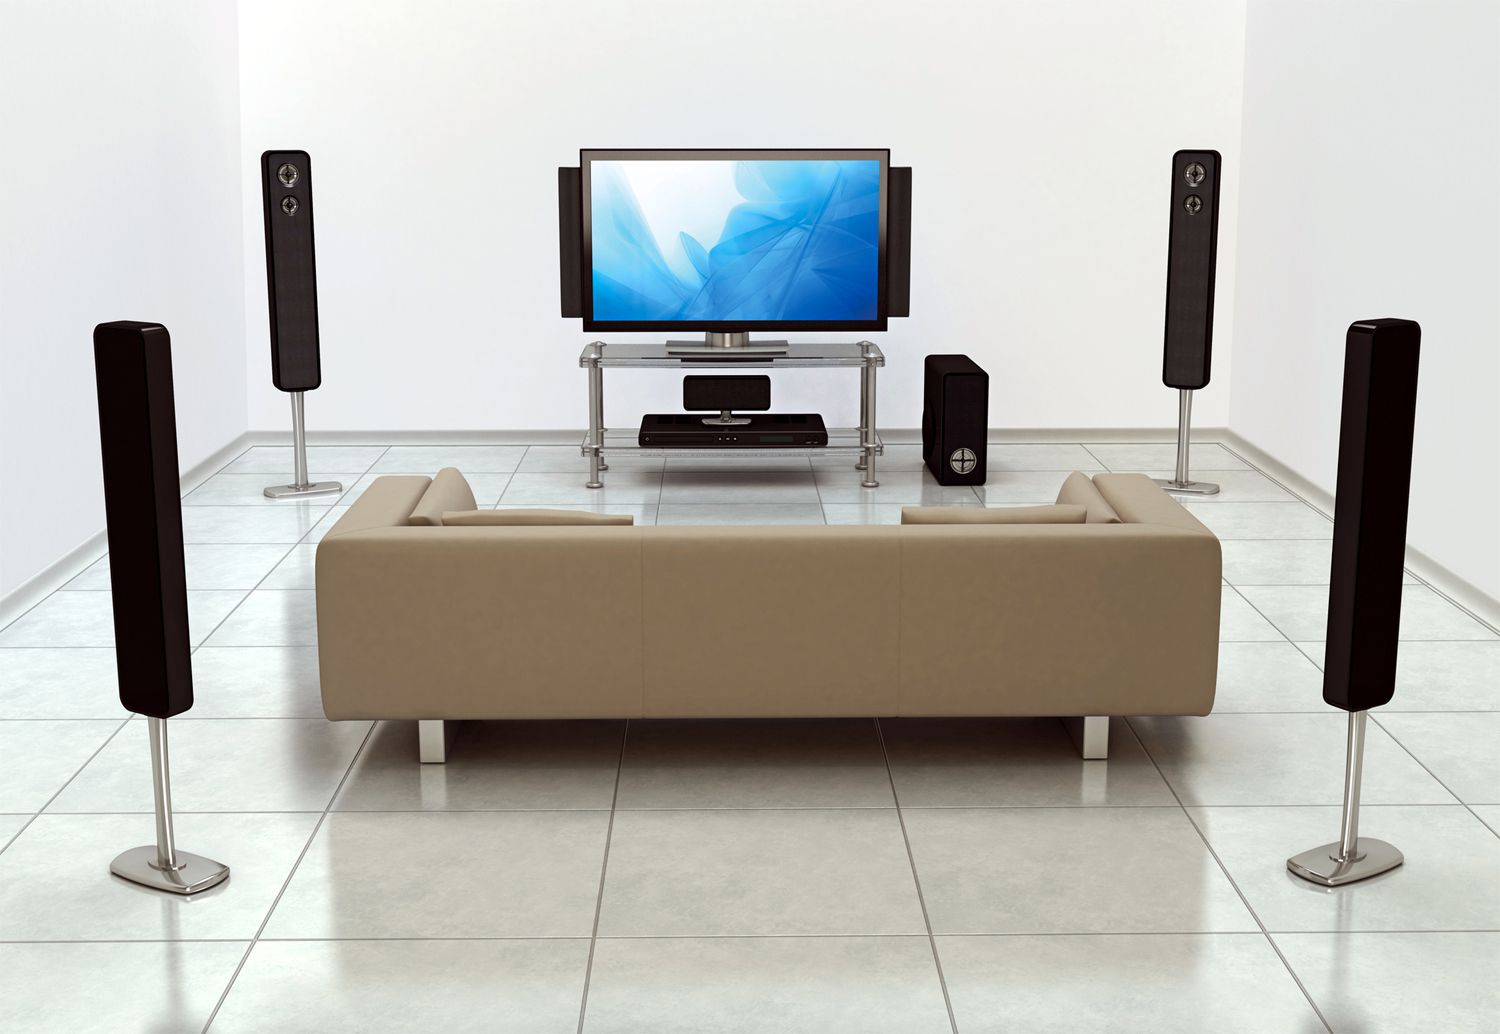 How To Set Up A Home Theater